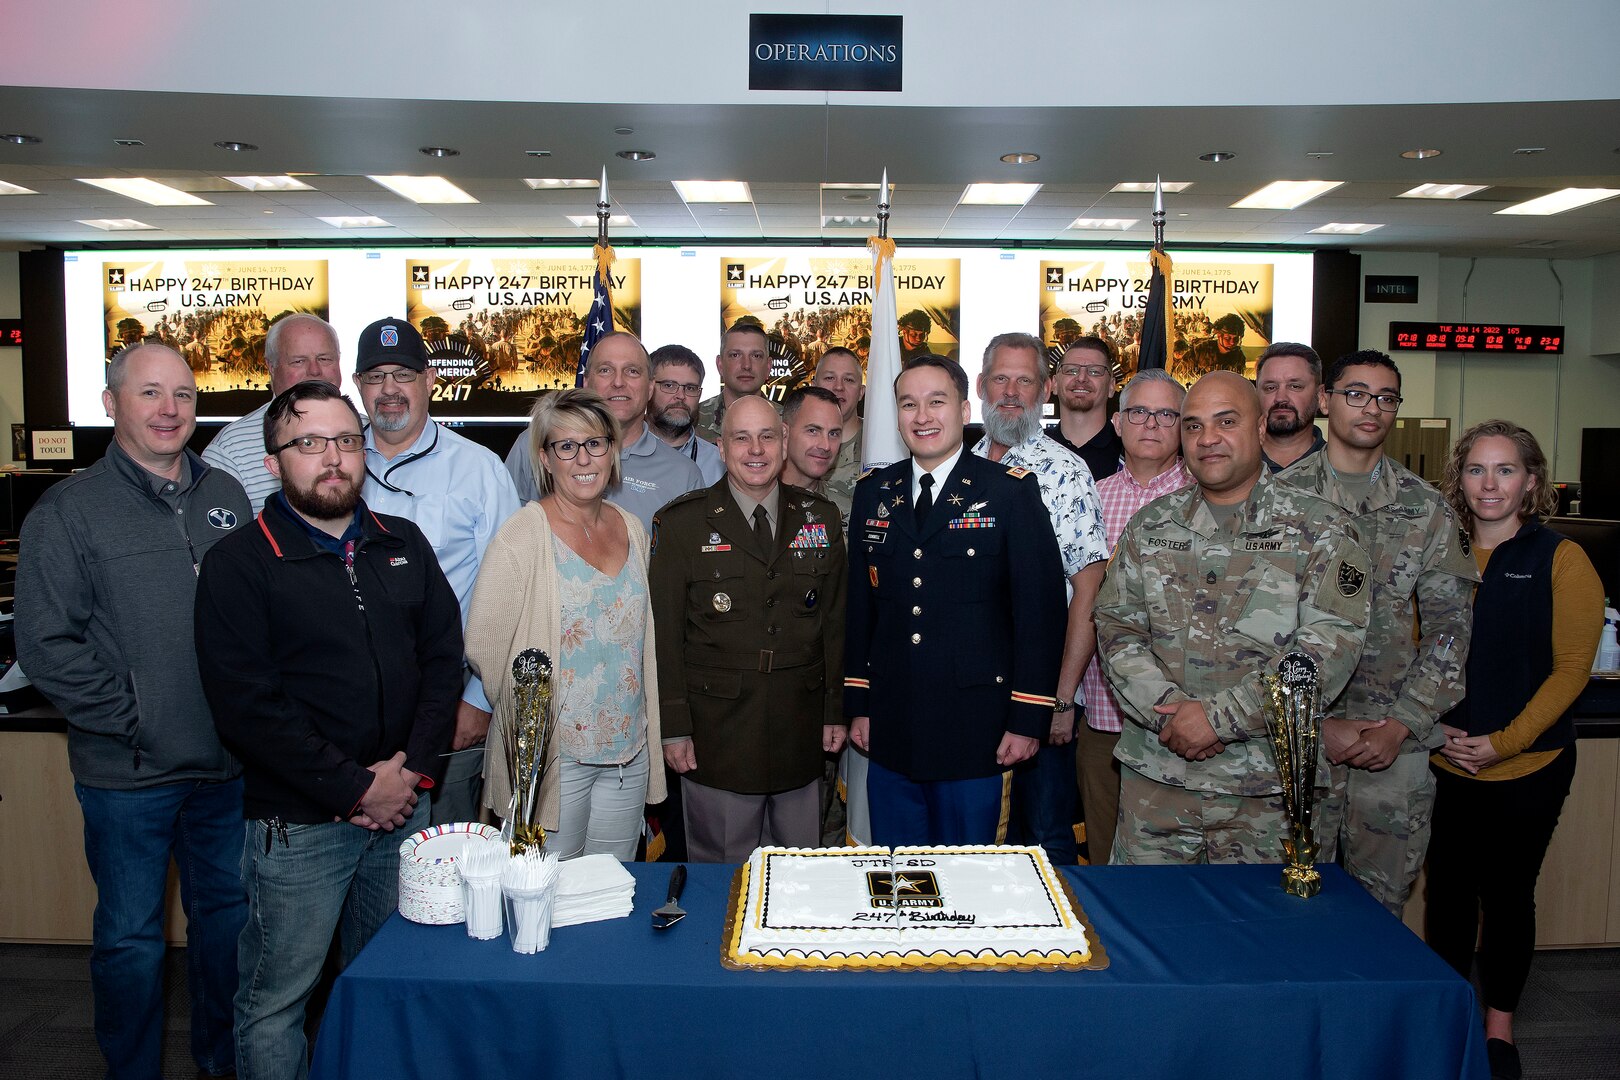 Group photo of many people standing in front of table with cake smiling